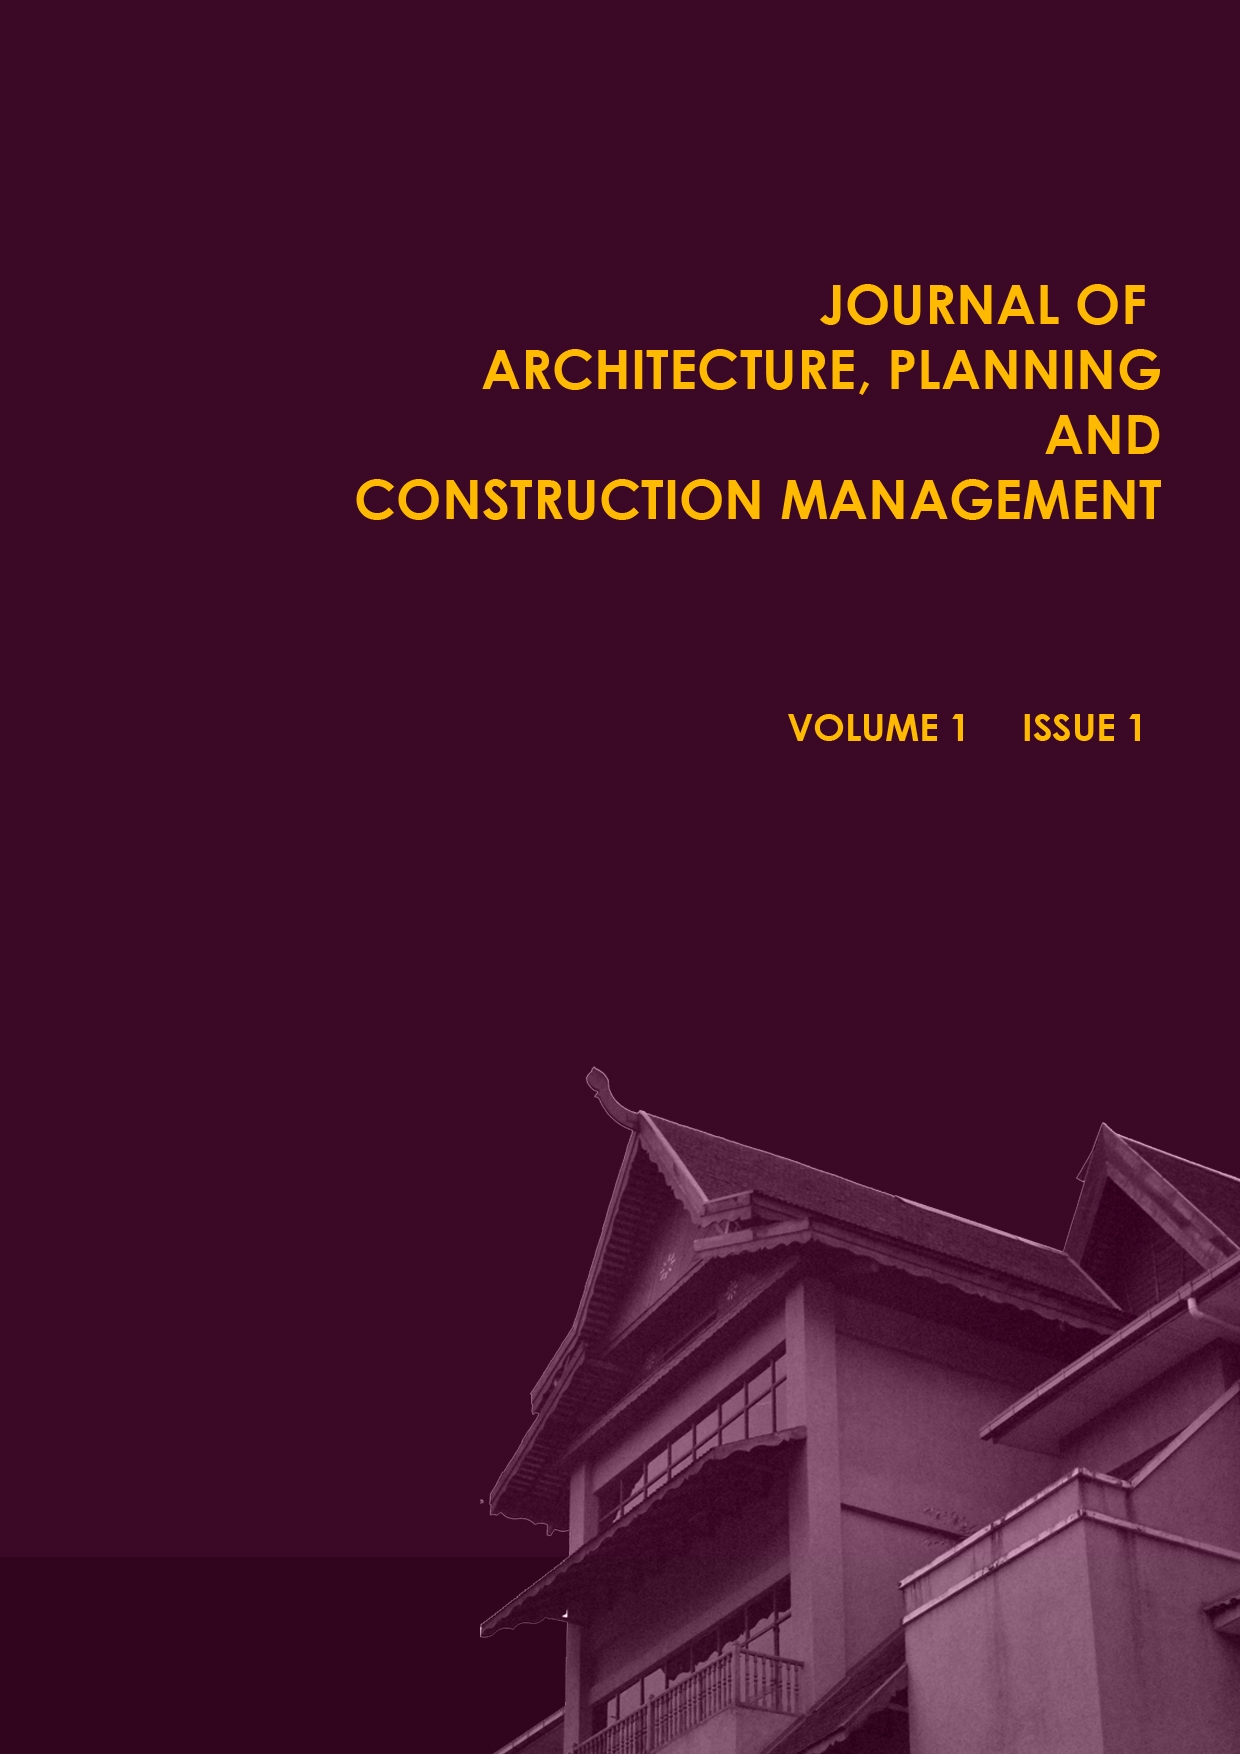 					View Vol. 1 No. 1 (2010): Journal of Architecture, Planning and Construction Management (JAPCM) 
				